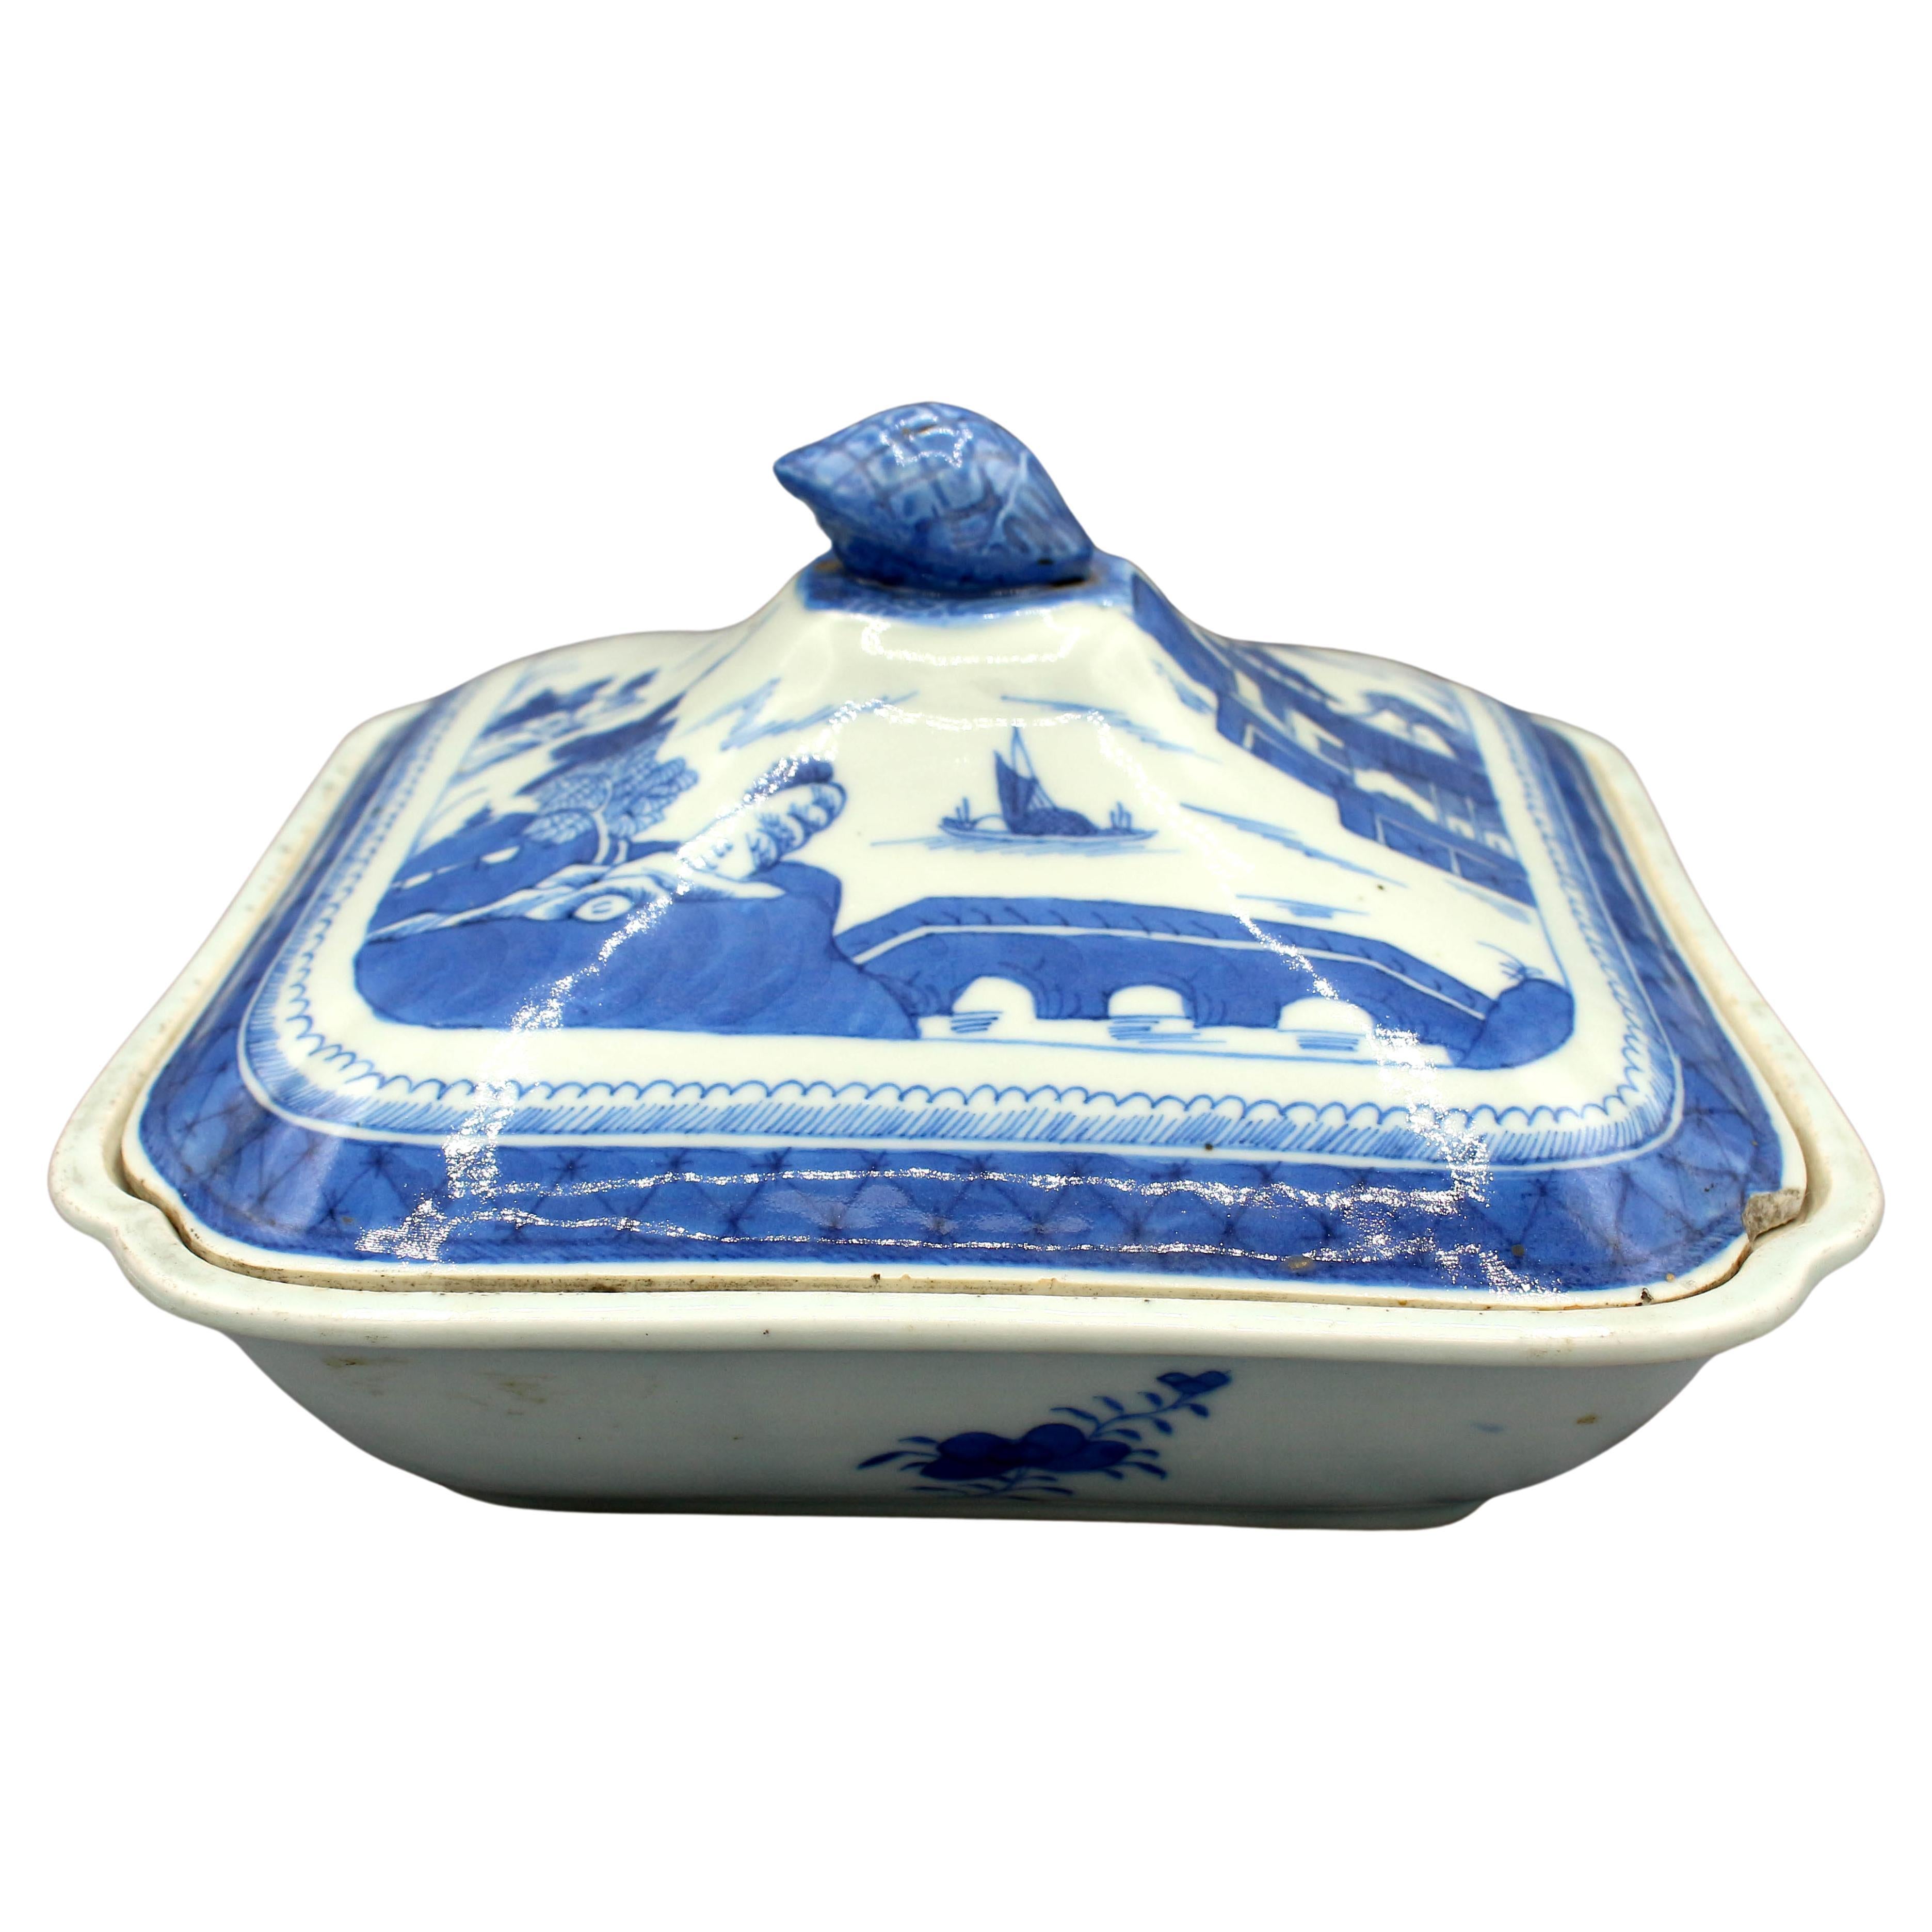 Circa 1830s Blue Canton Associated Covered Vegetable Dish, Chinese Export For Sale